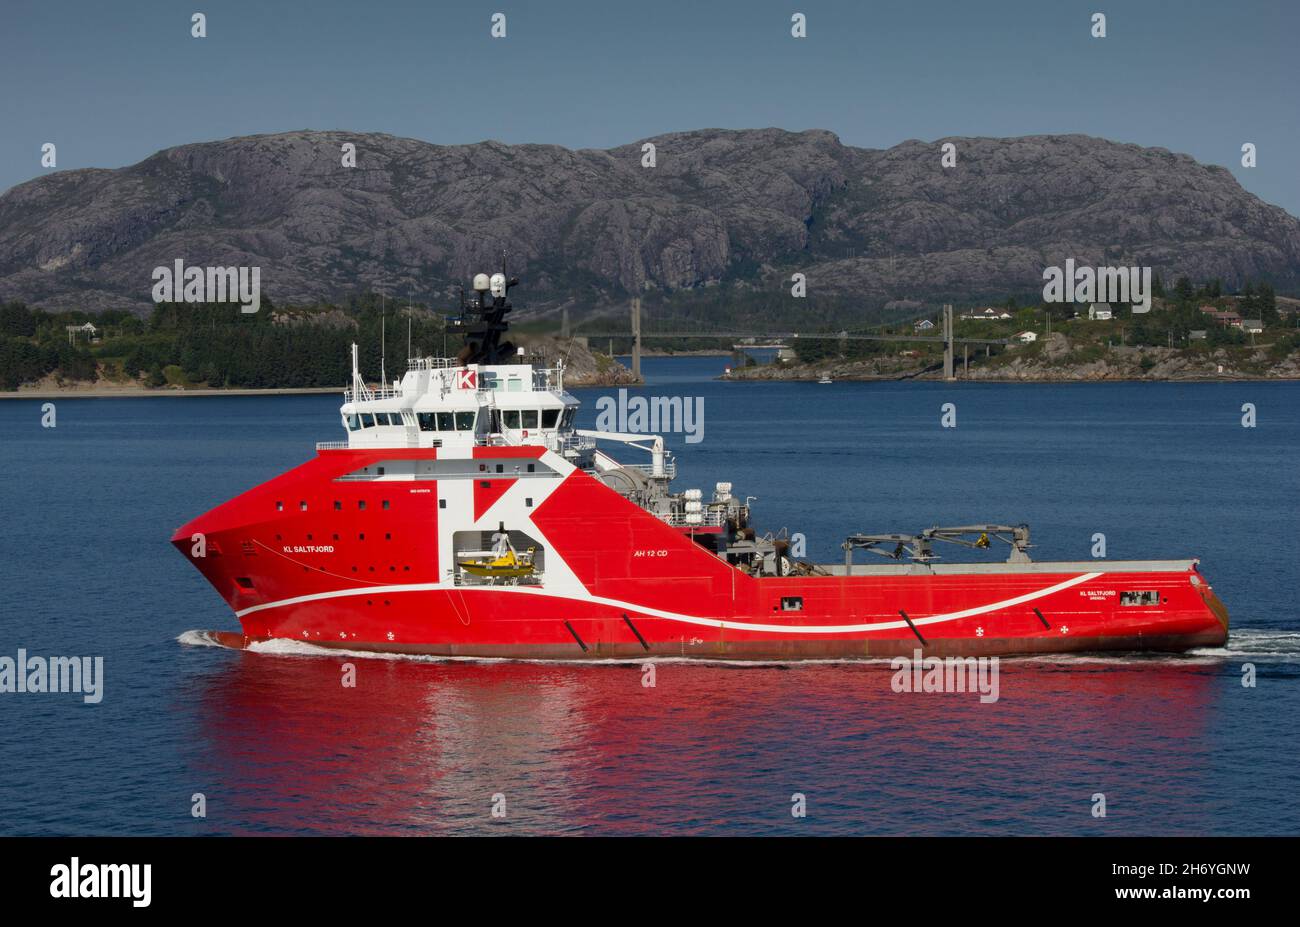 KL Saltfjord, anchor handling tug supply vessel for 'K' line.  Sailing from Bergen, Norway.  Norwegian coastline and mountains in background. Stock Photo